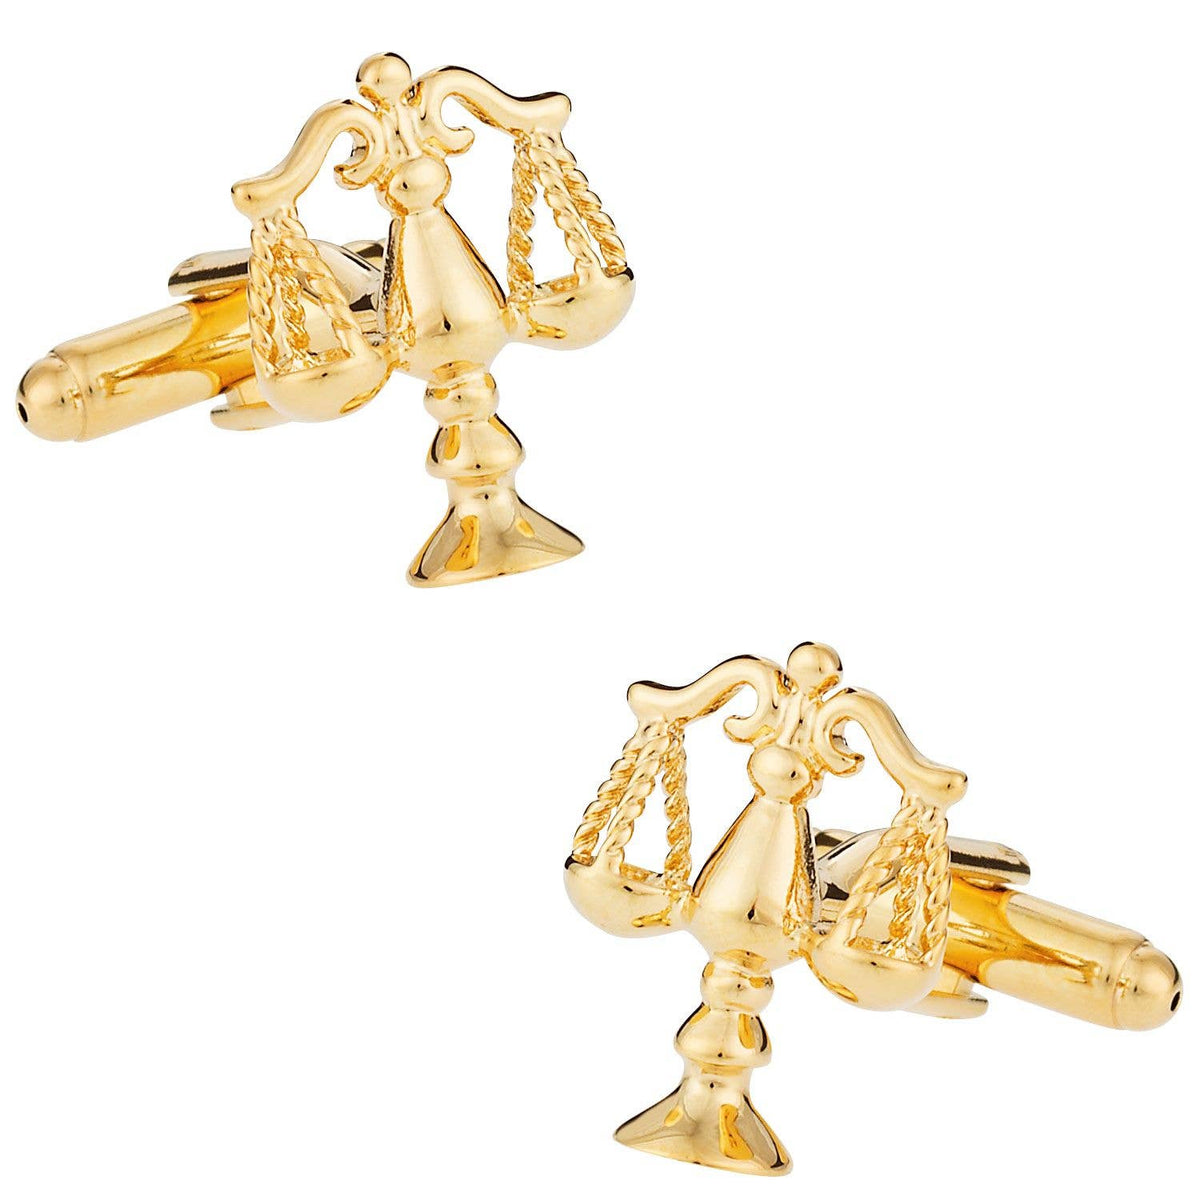 Gold Tone Scales of Justice Cufflinks